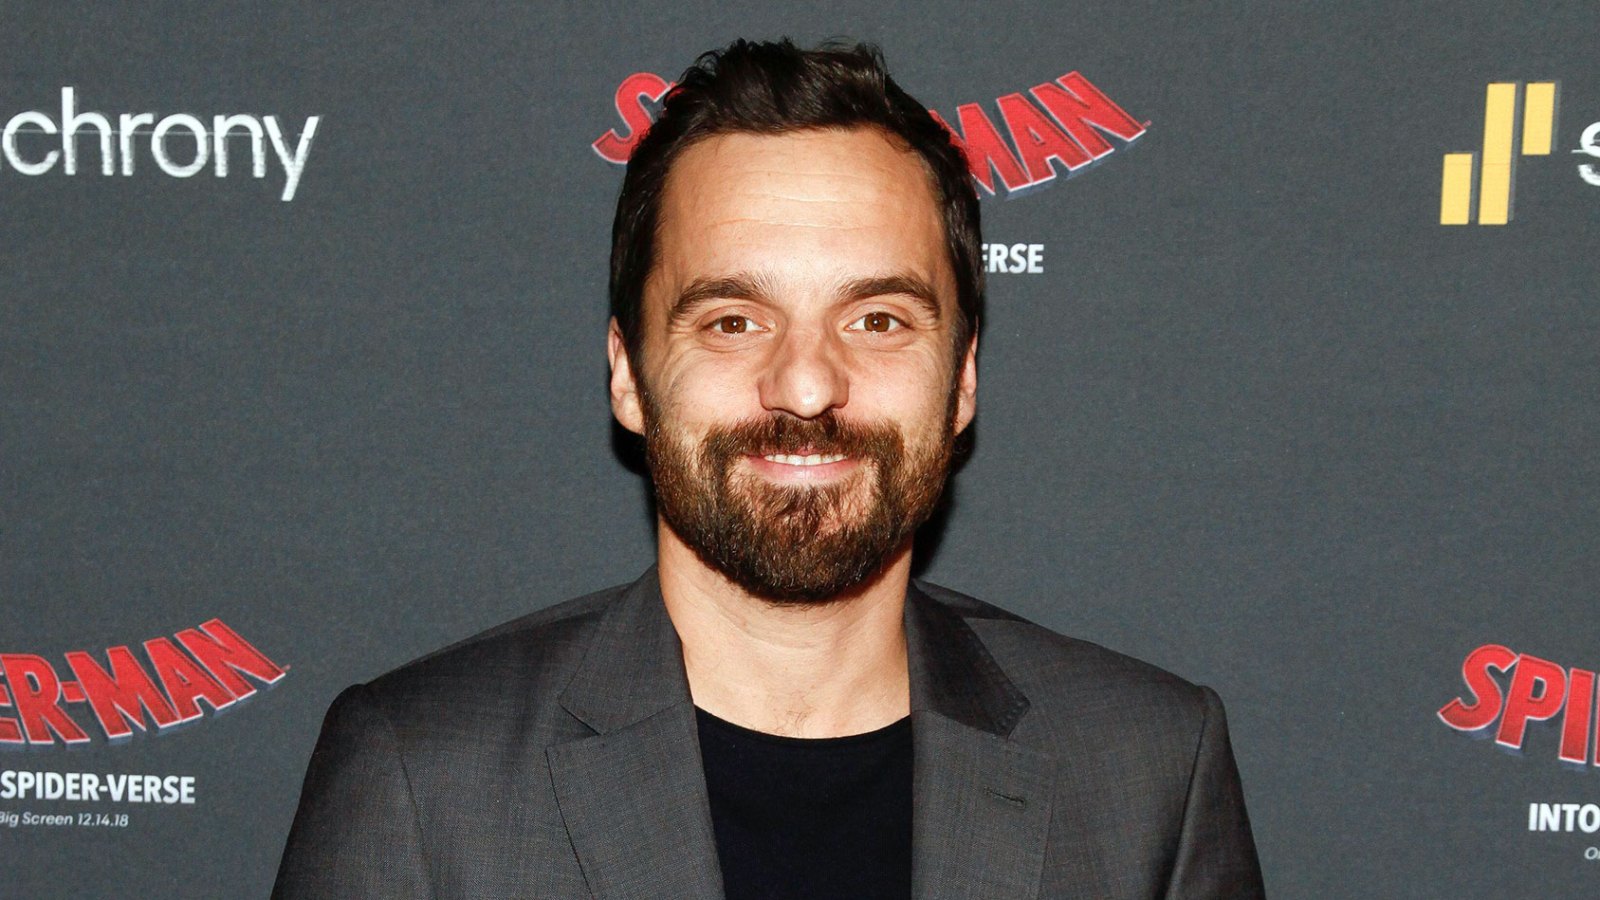 Jake Johnson Minx Pilot Was One of the Best Things I’ve Read in Years